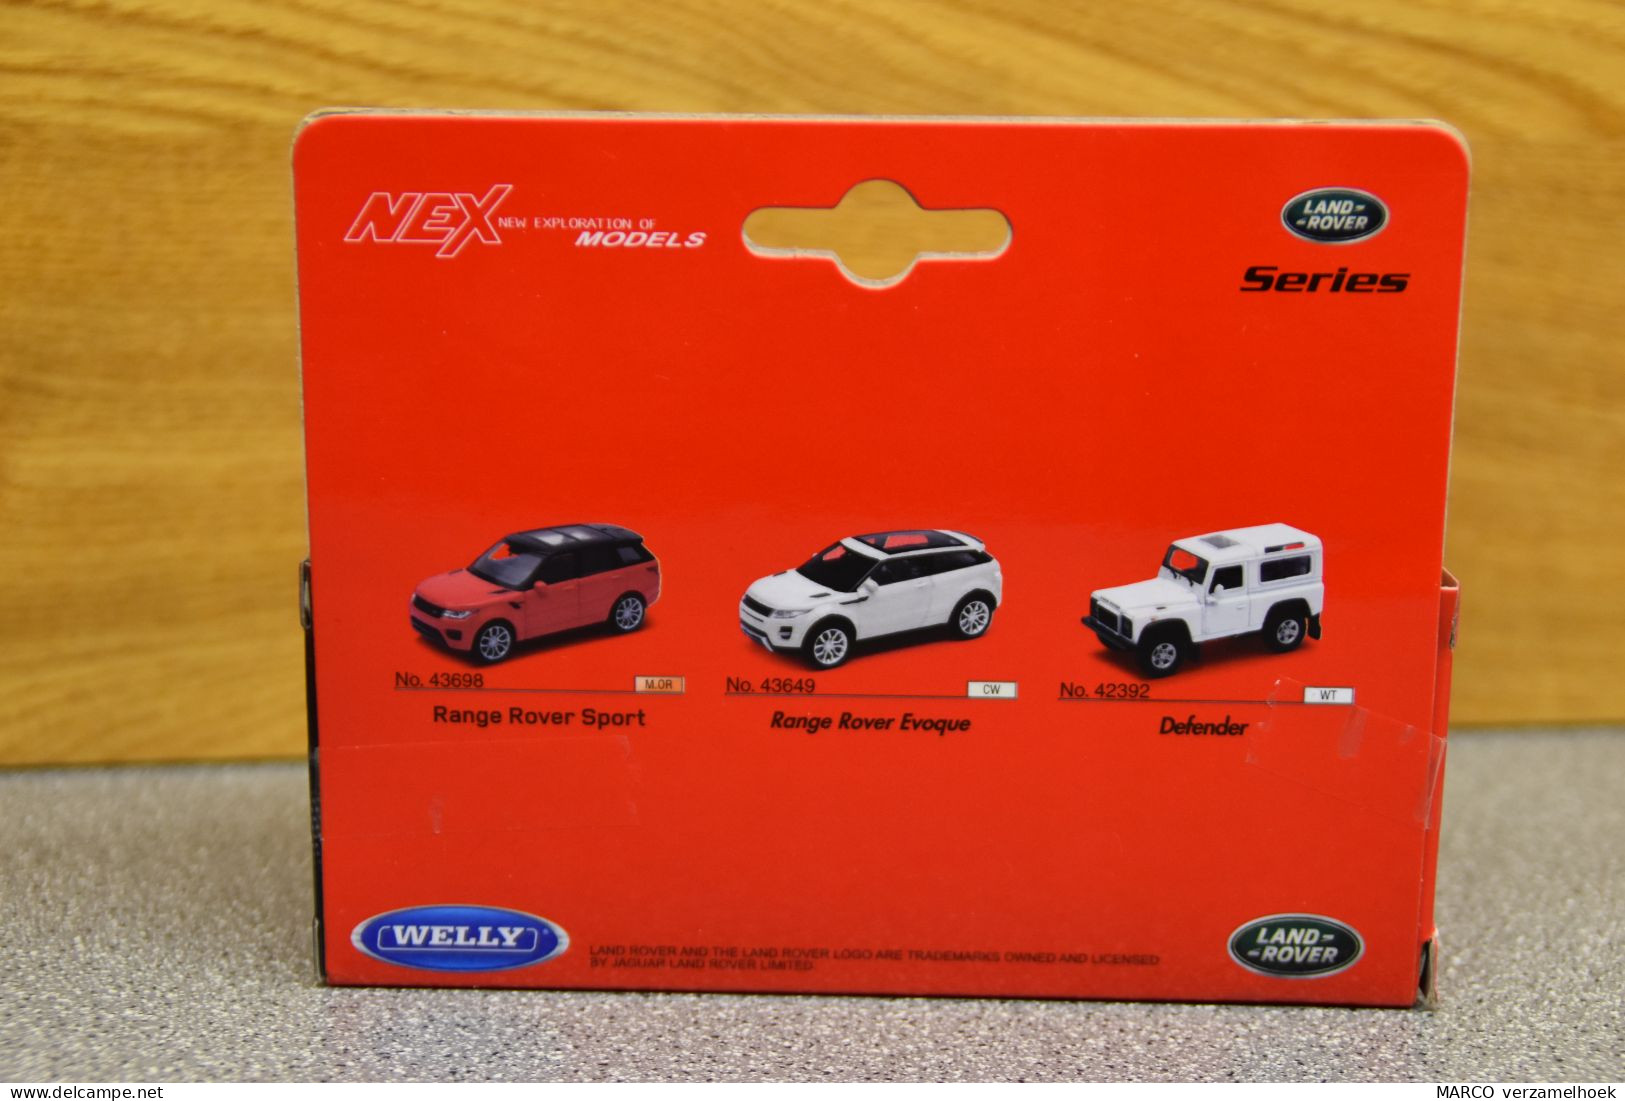 42392 Welly NEX Landrover Defender Scale 1:43 - Welly